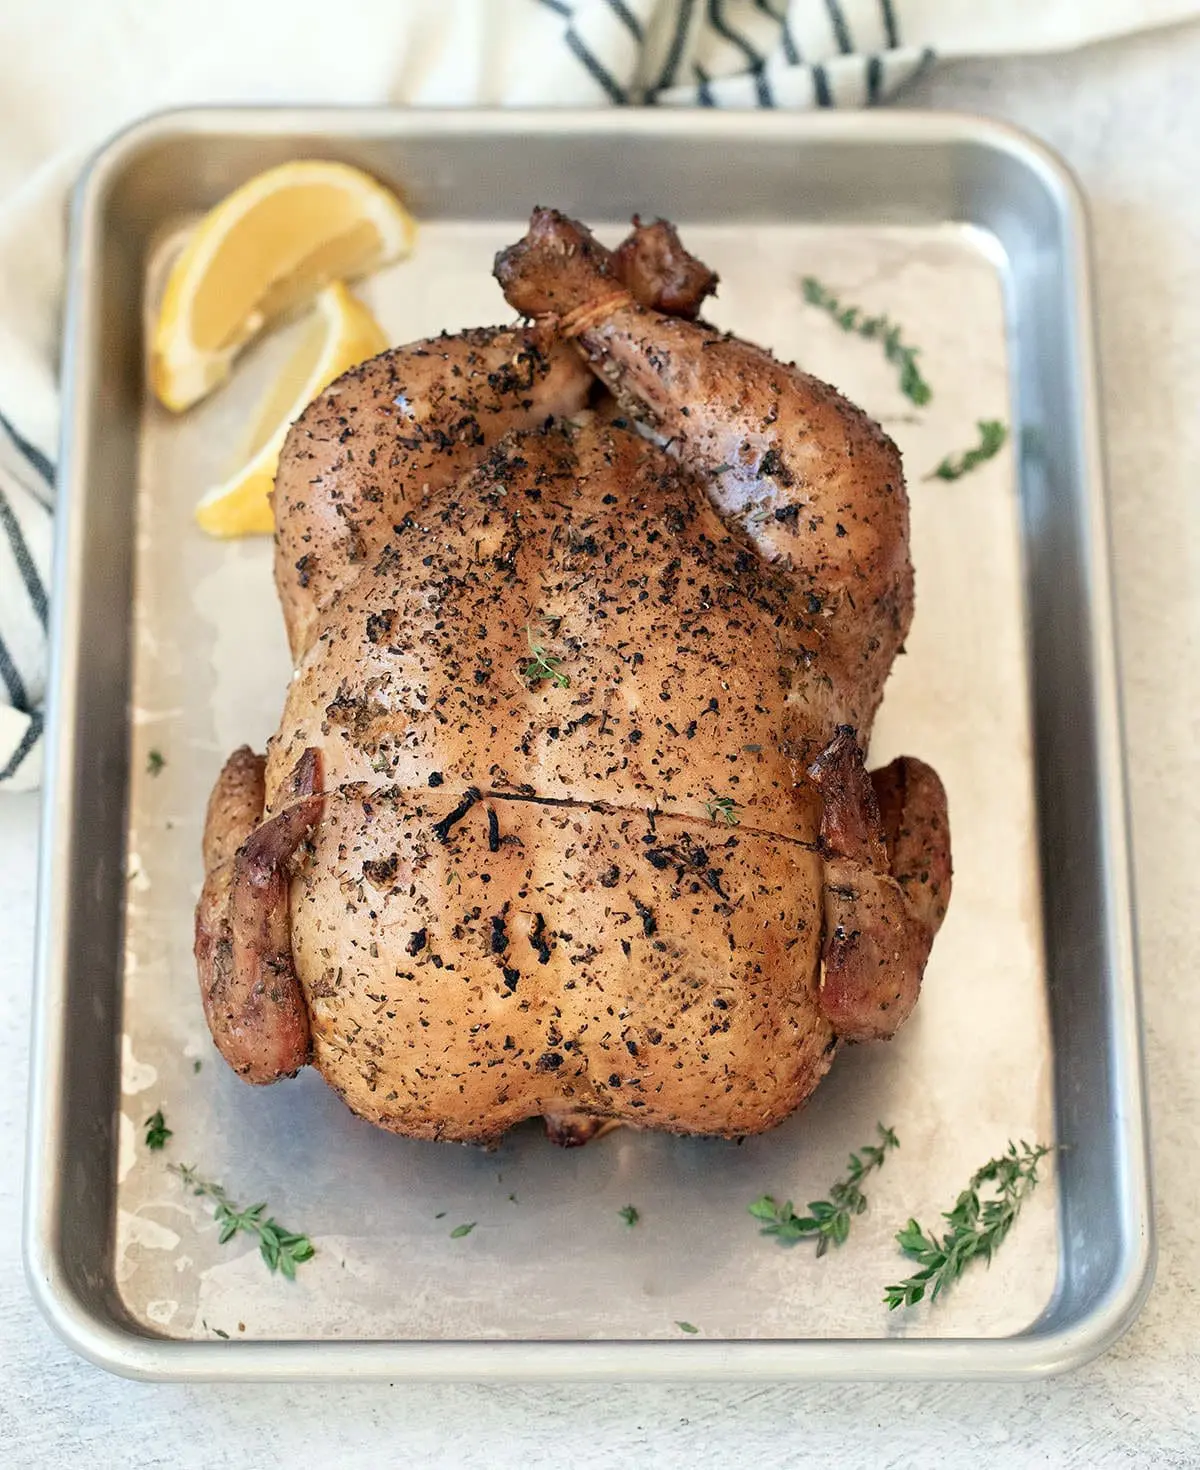 Smoked whole chicken on a silver baking sheet.